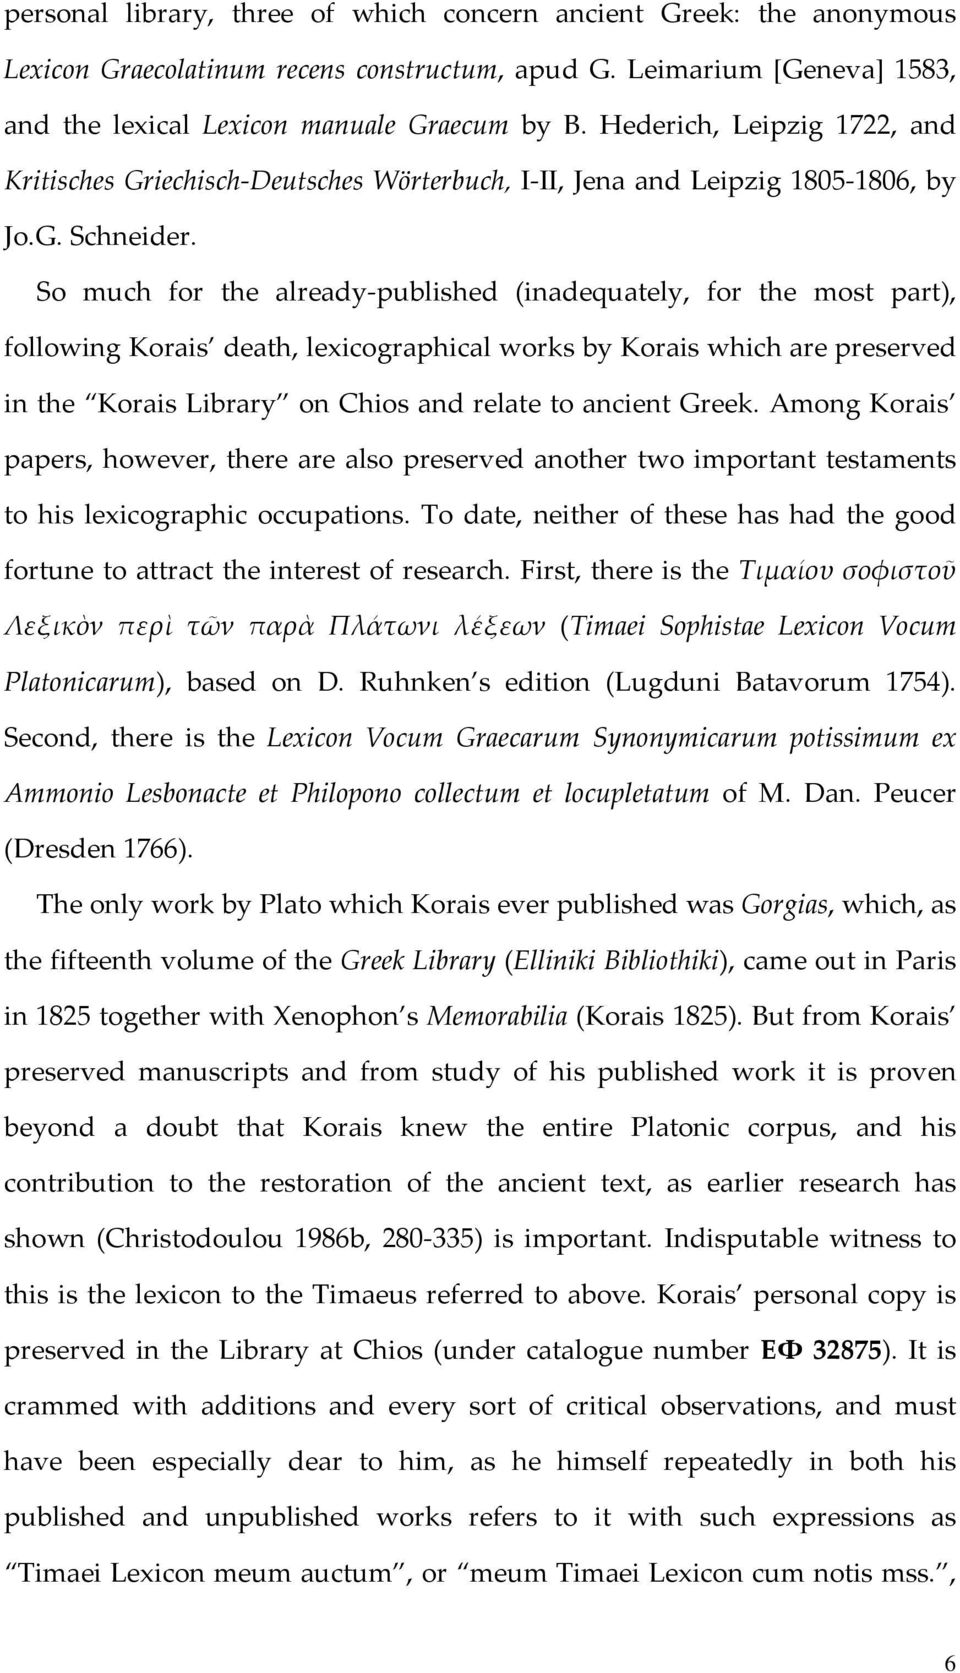 So much for the already published (inadequately, for the most part), following Korais death, lexicographical works by Korais which are preserved in the Korais Library on Chios and relate to ancient